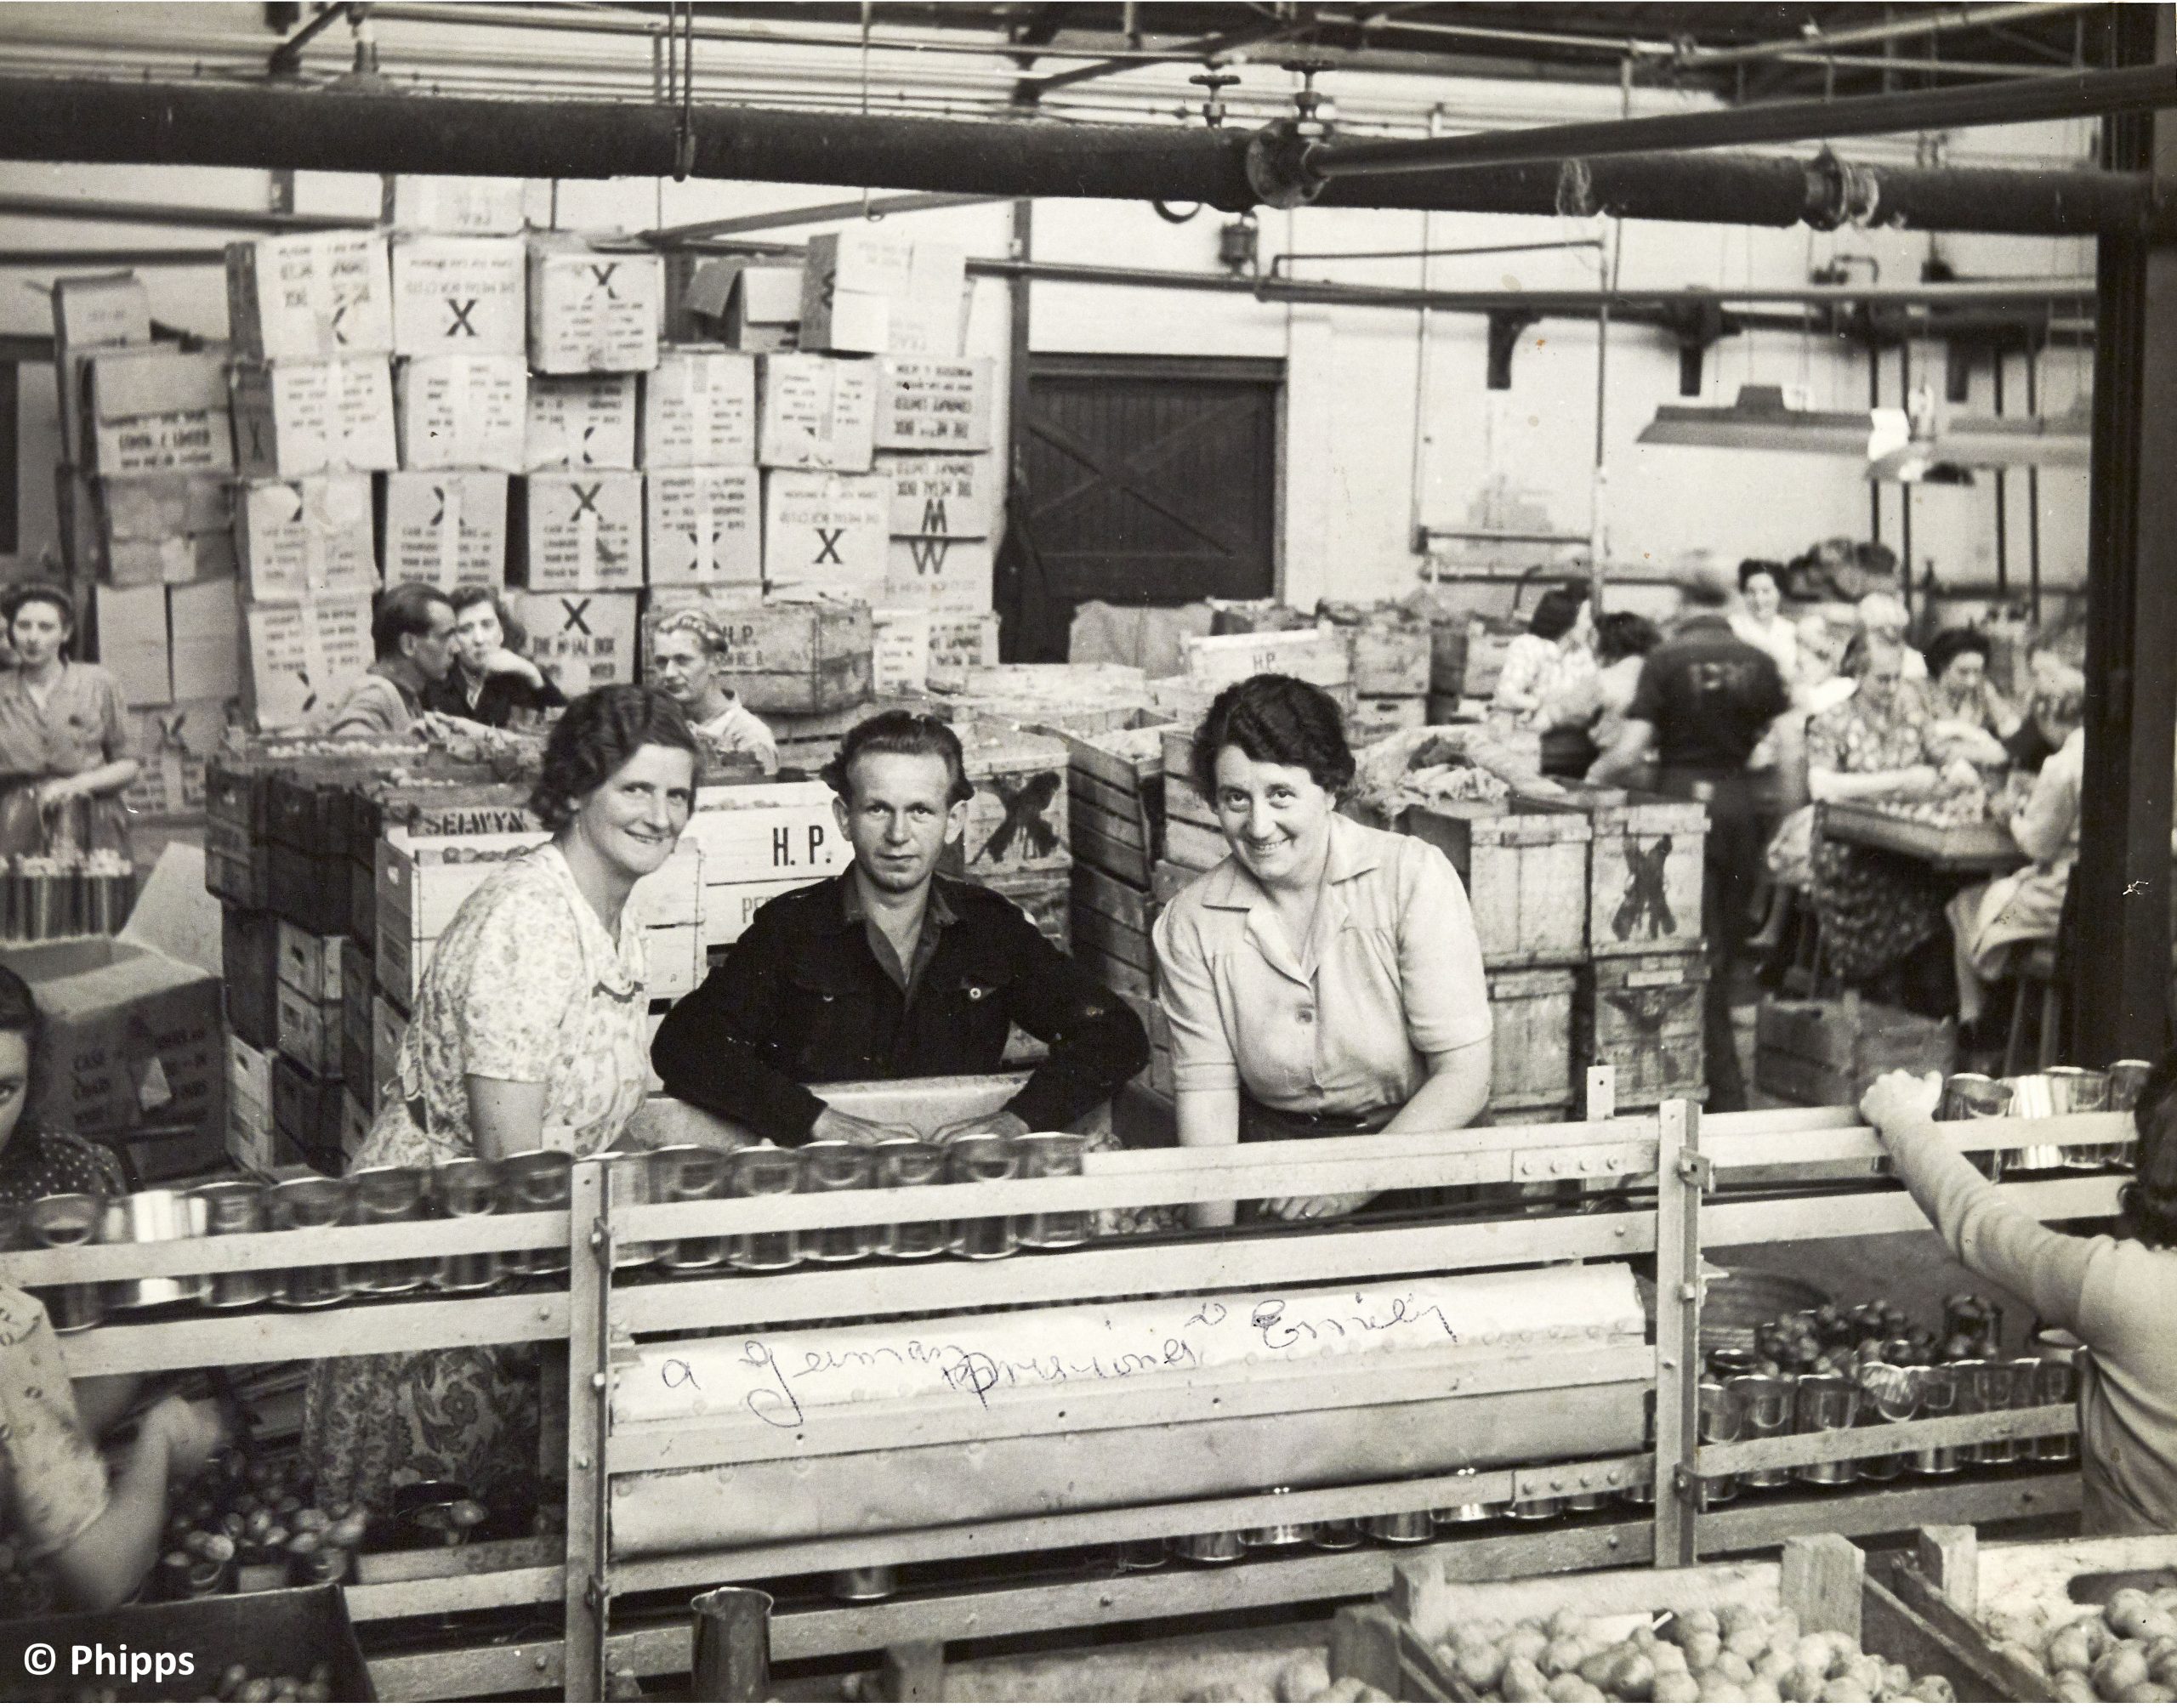 Workers at factory conveyor belt with boxes in background